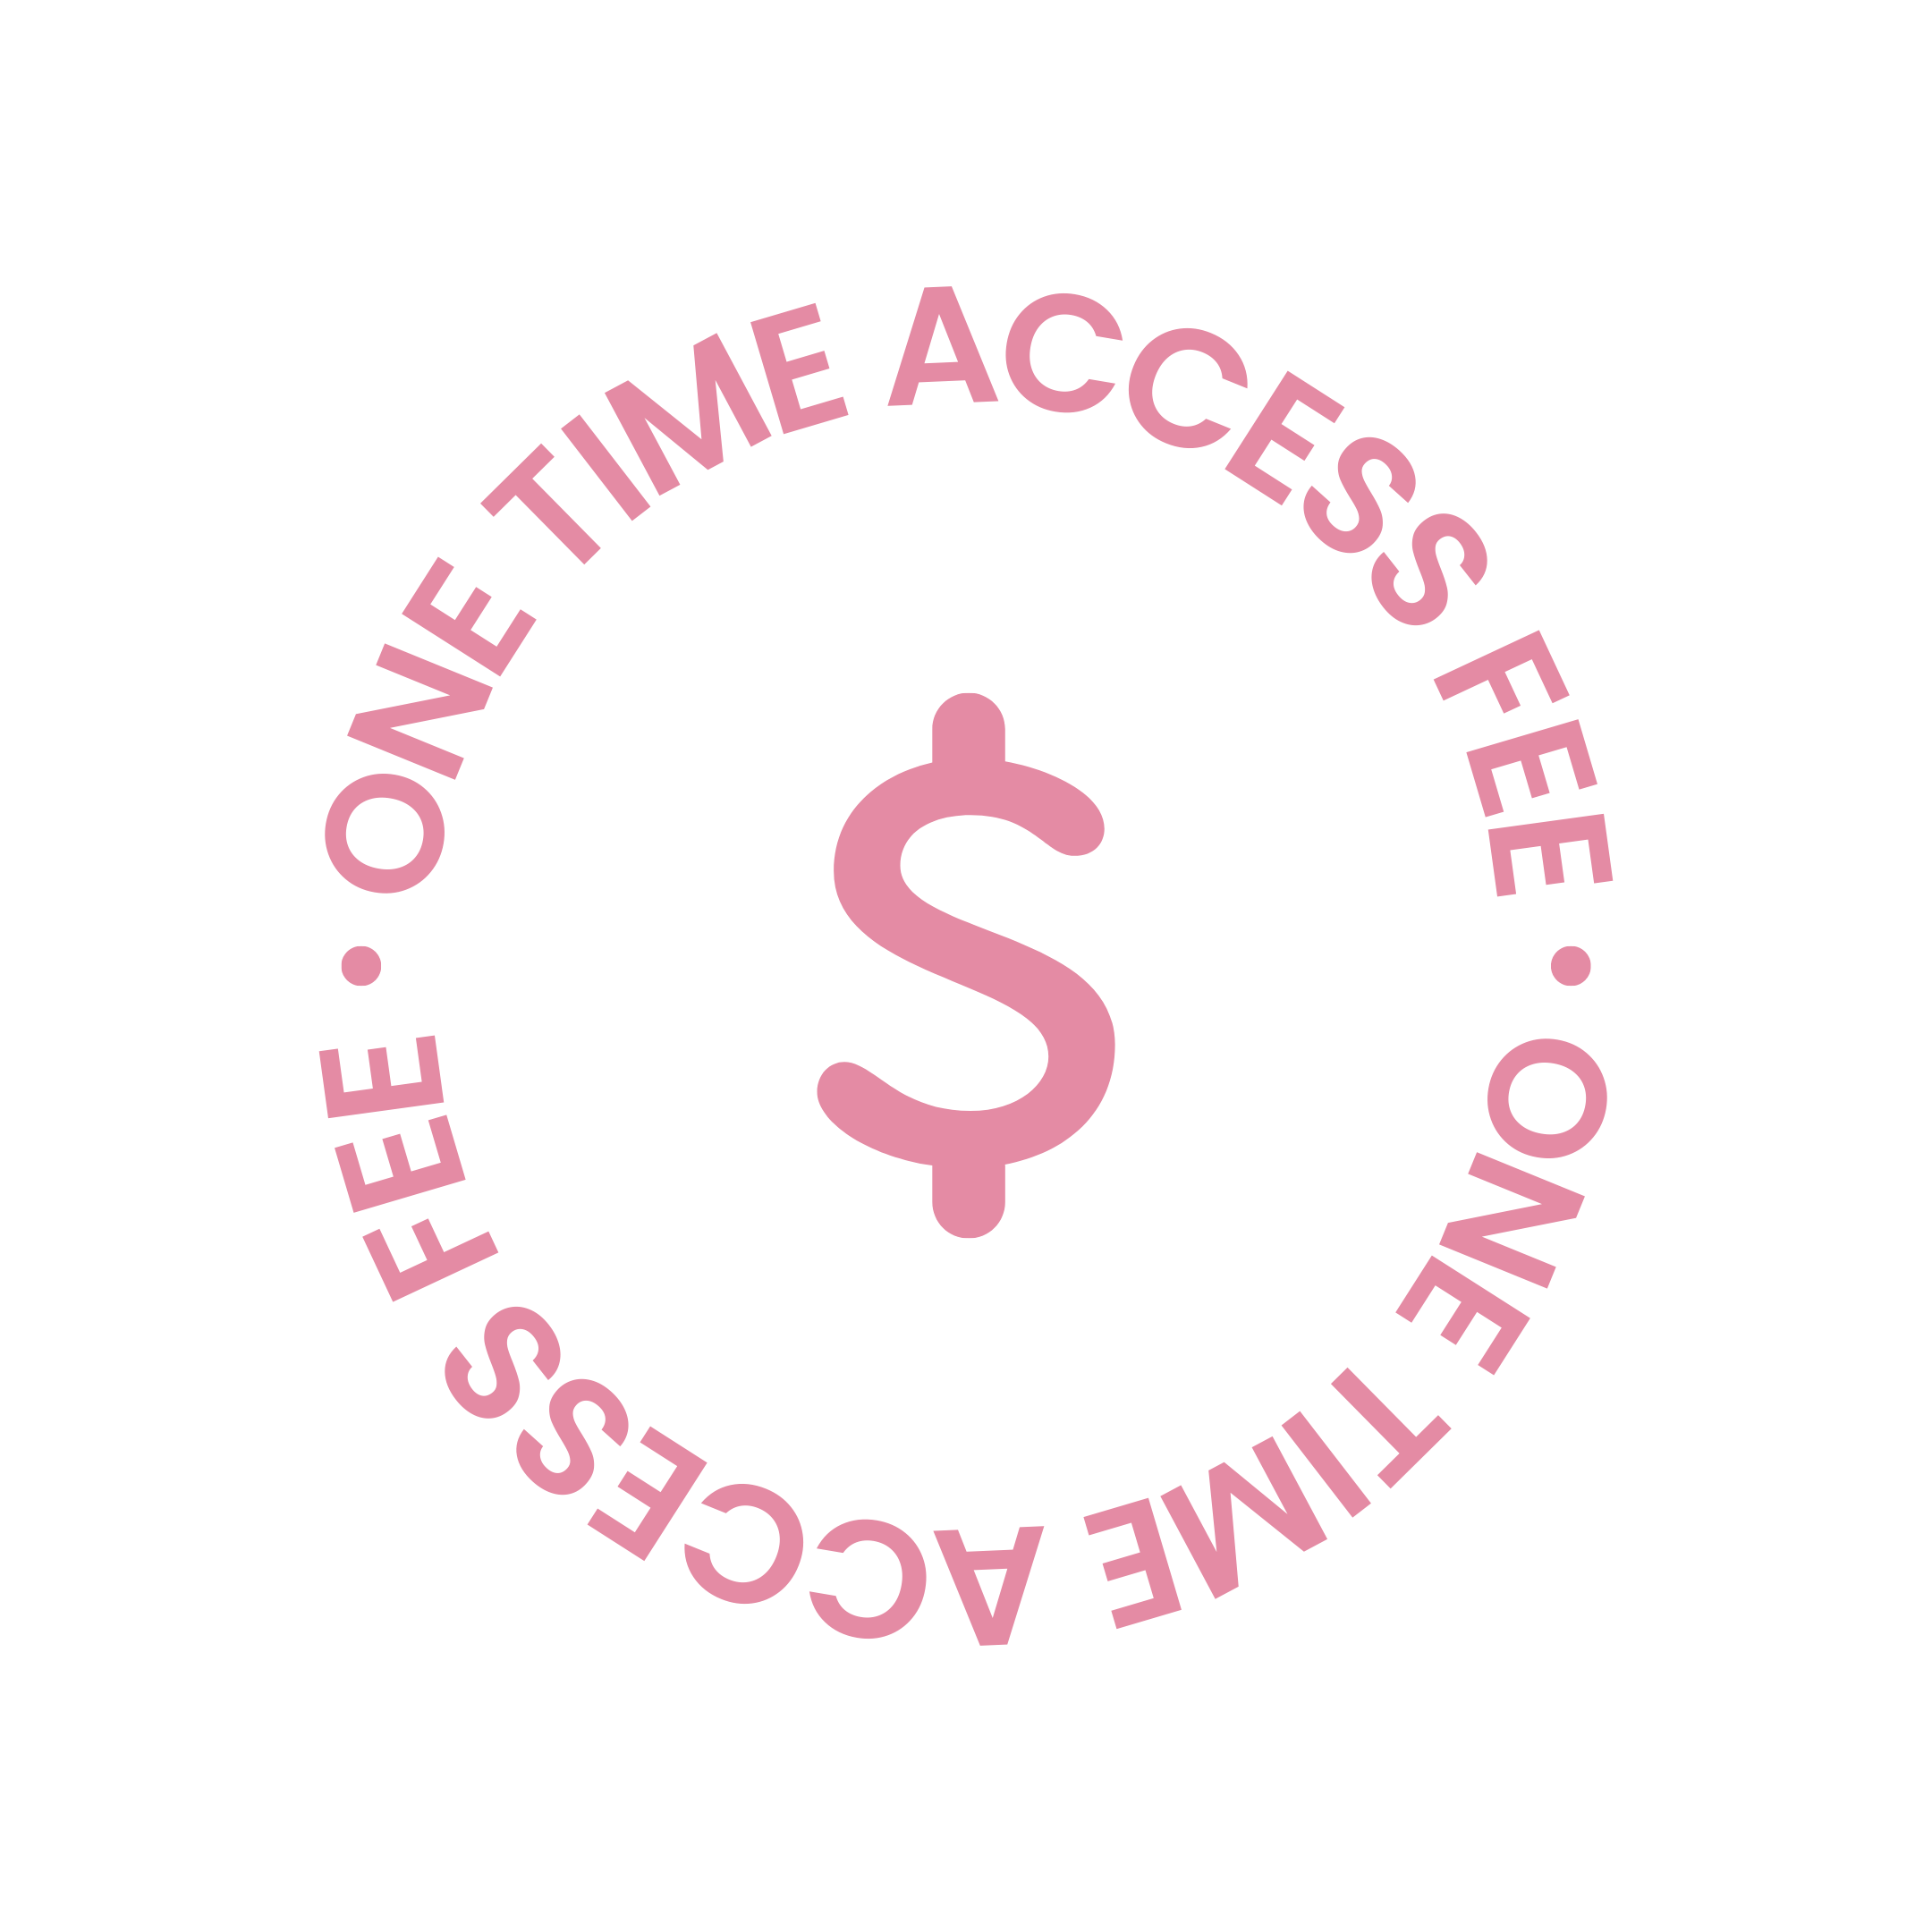 One Time Access Fee Icon